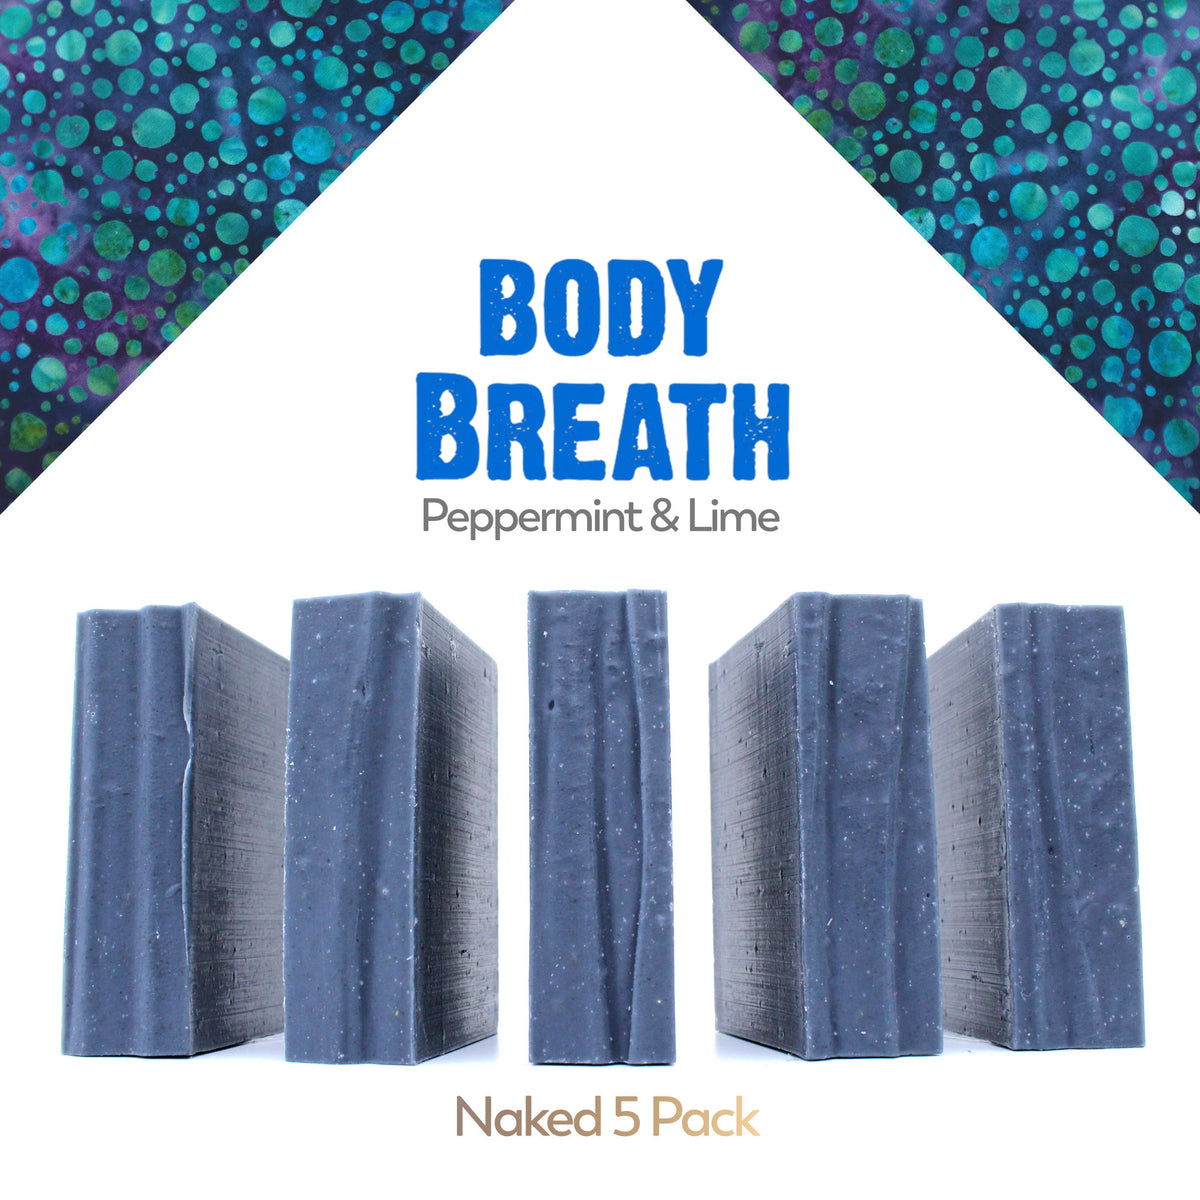 Naked five pack of Body Breath Peppermint essential oil organic bar soap from ground Soap.